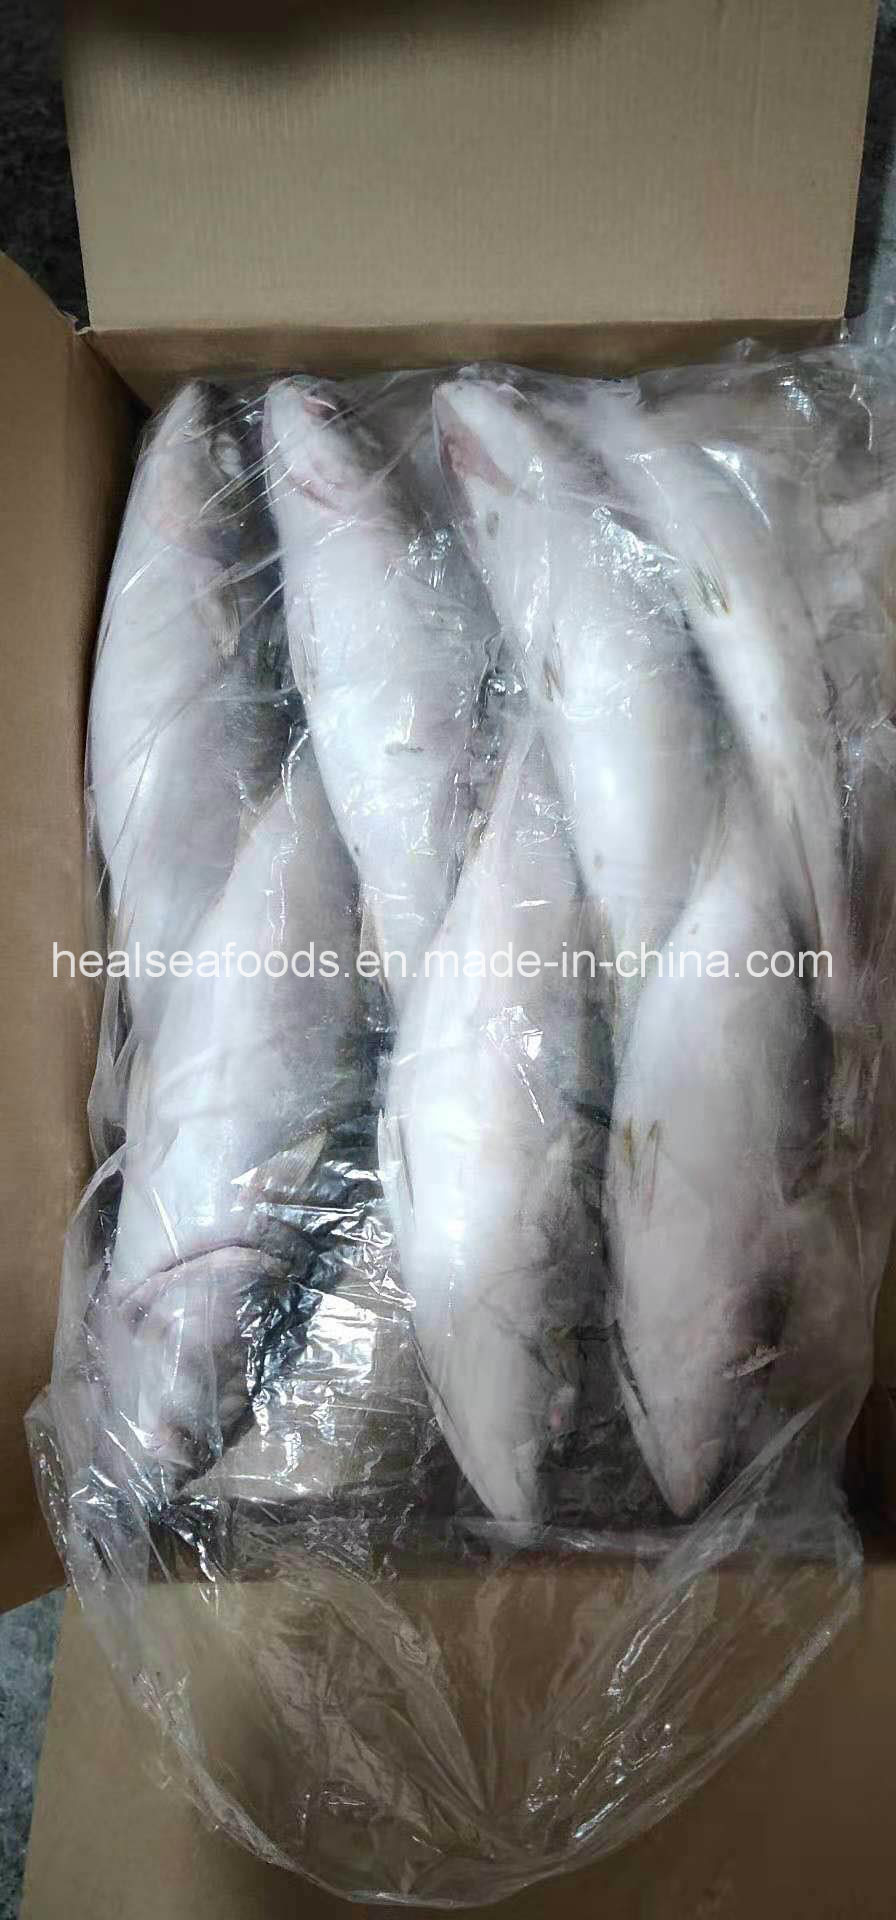 Frozen Yellow Tail 500 700g For Sale China Price Supplier 21food